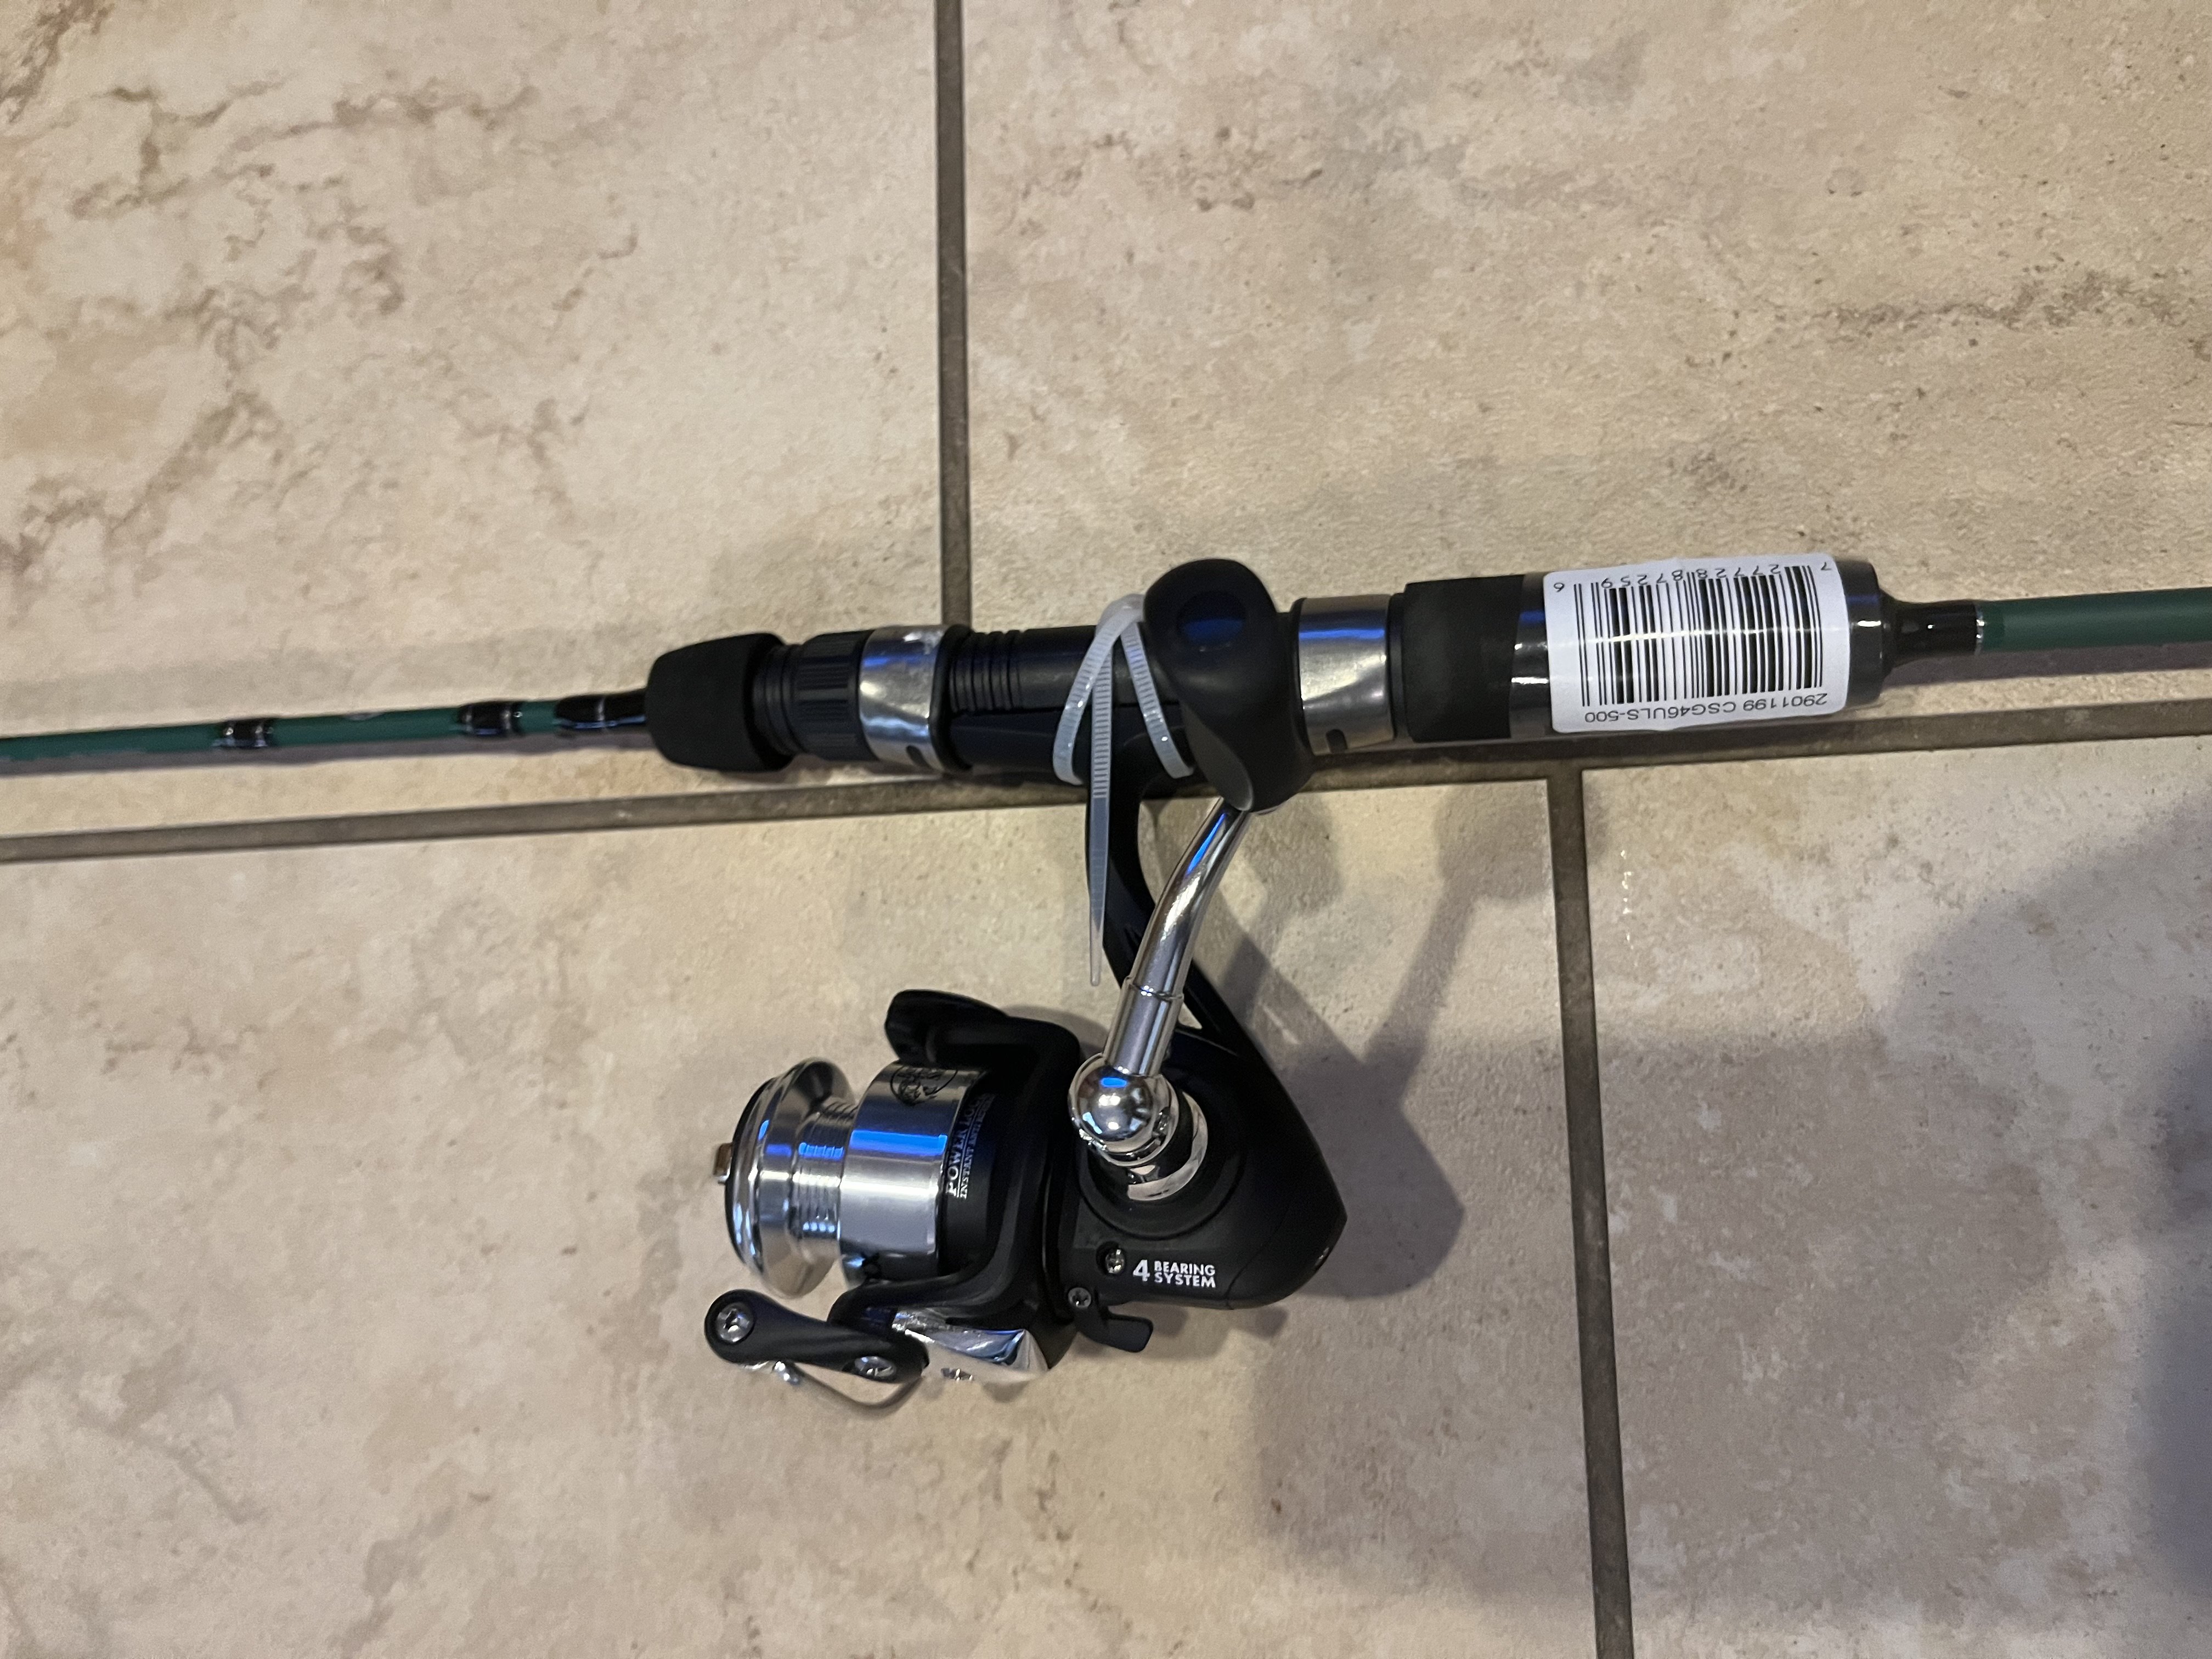 Bass Pro Shop Crappie maxx Spinning Rod and Reel Combo